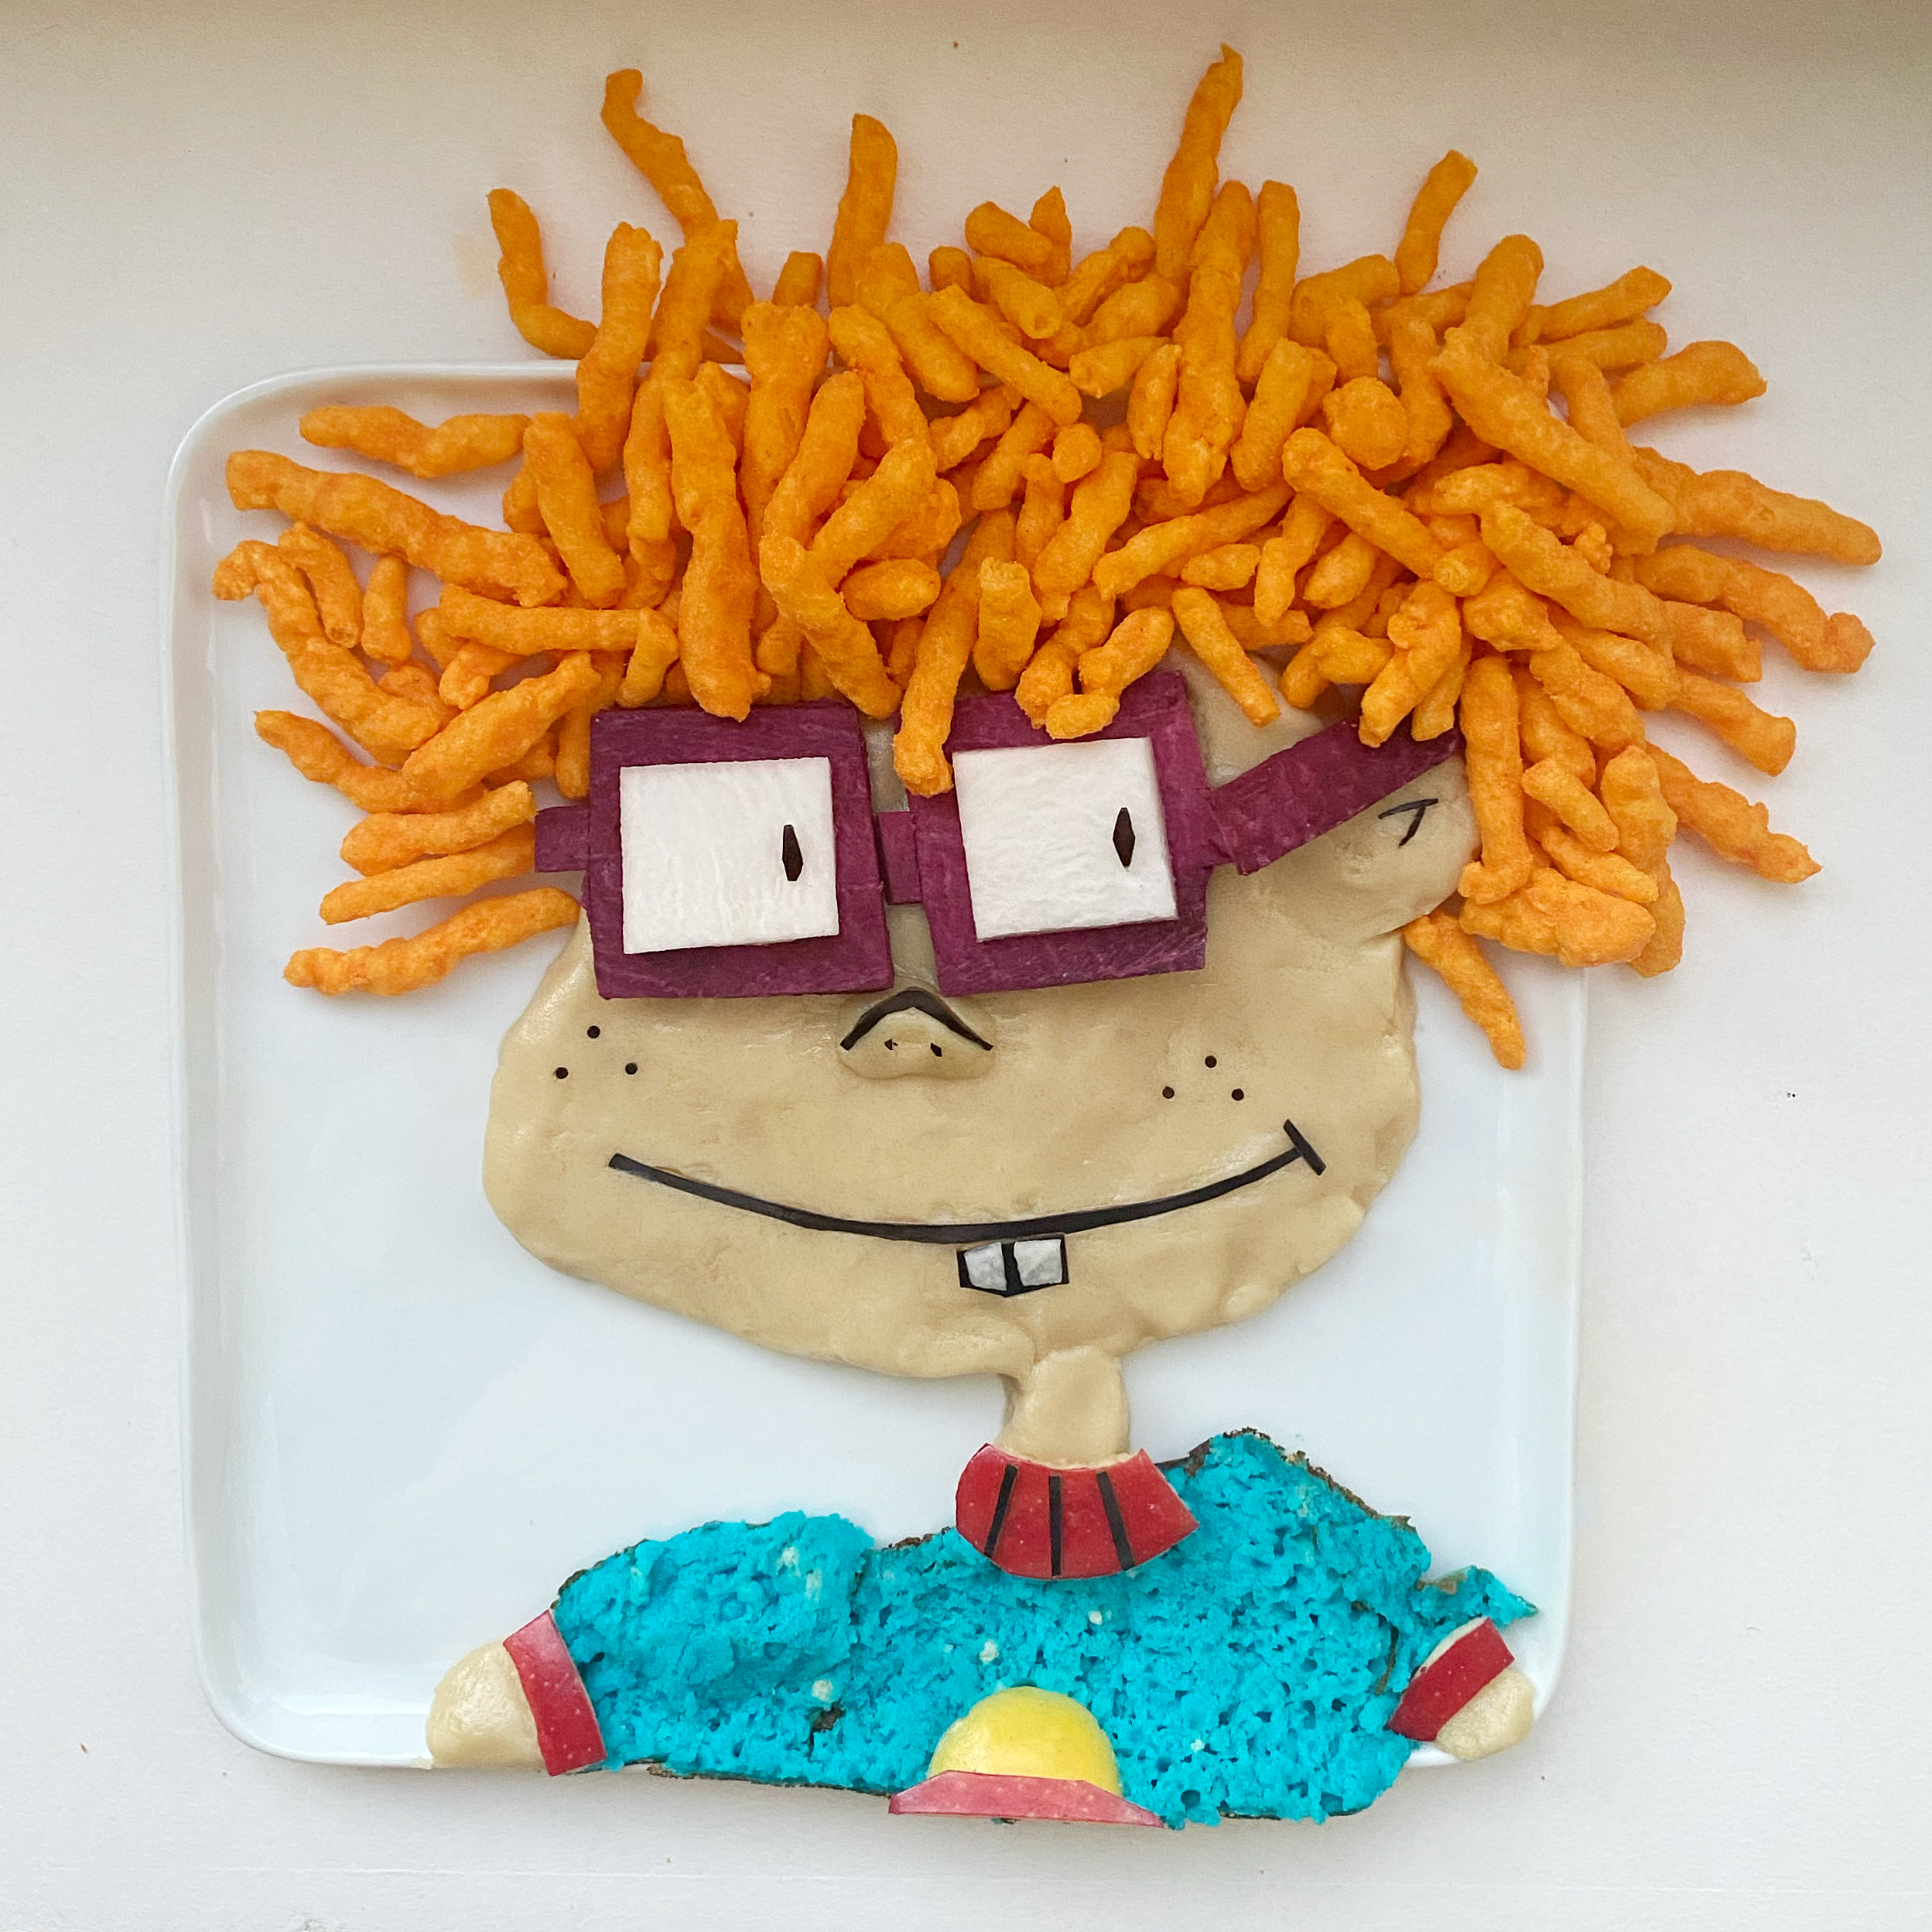 Chuckie from Rugrats – cookie dough, cheese curls, dyed pancake, apples, purple potato, eggplant and turnip by Harley Langberg